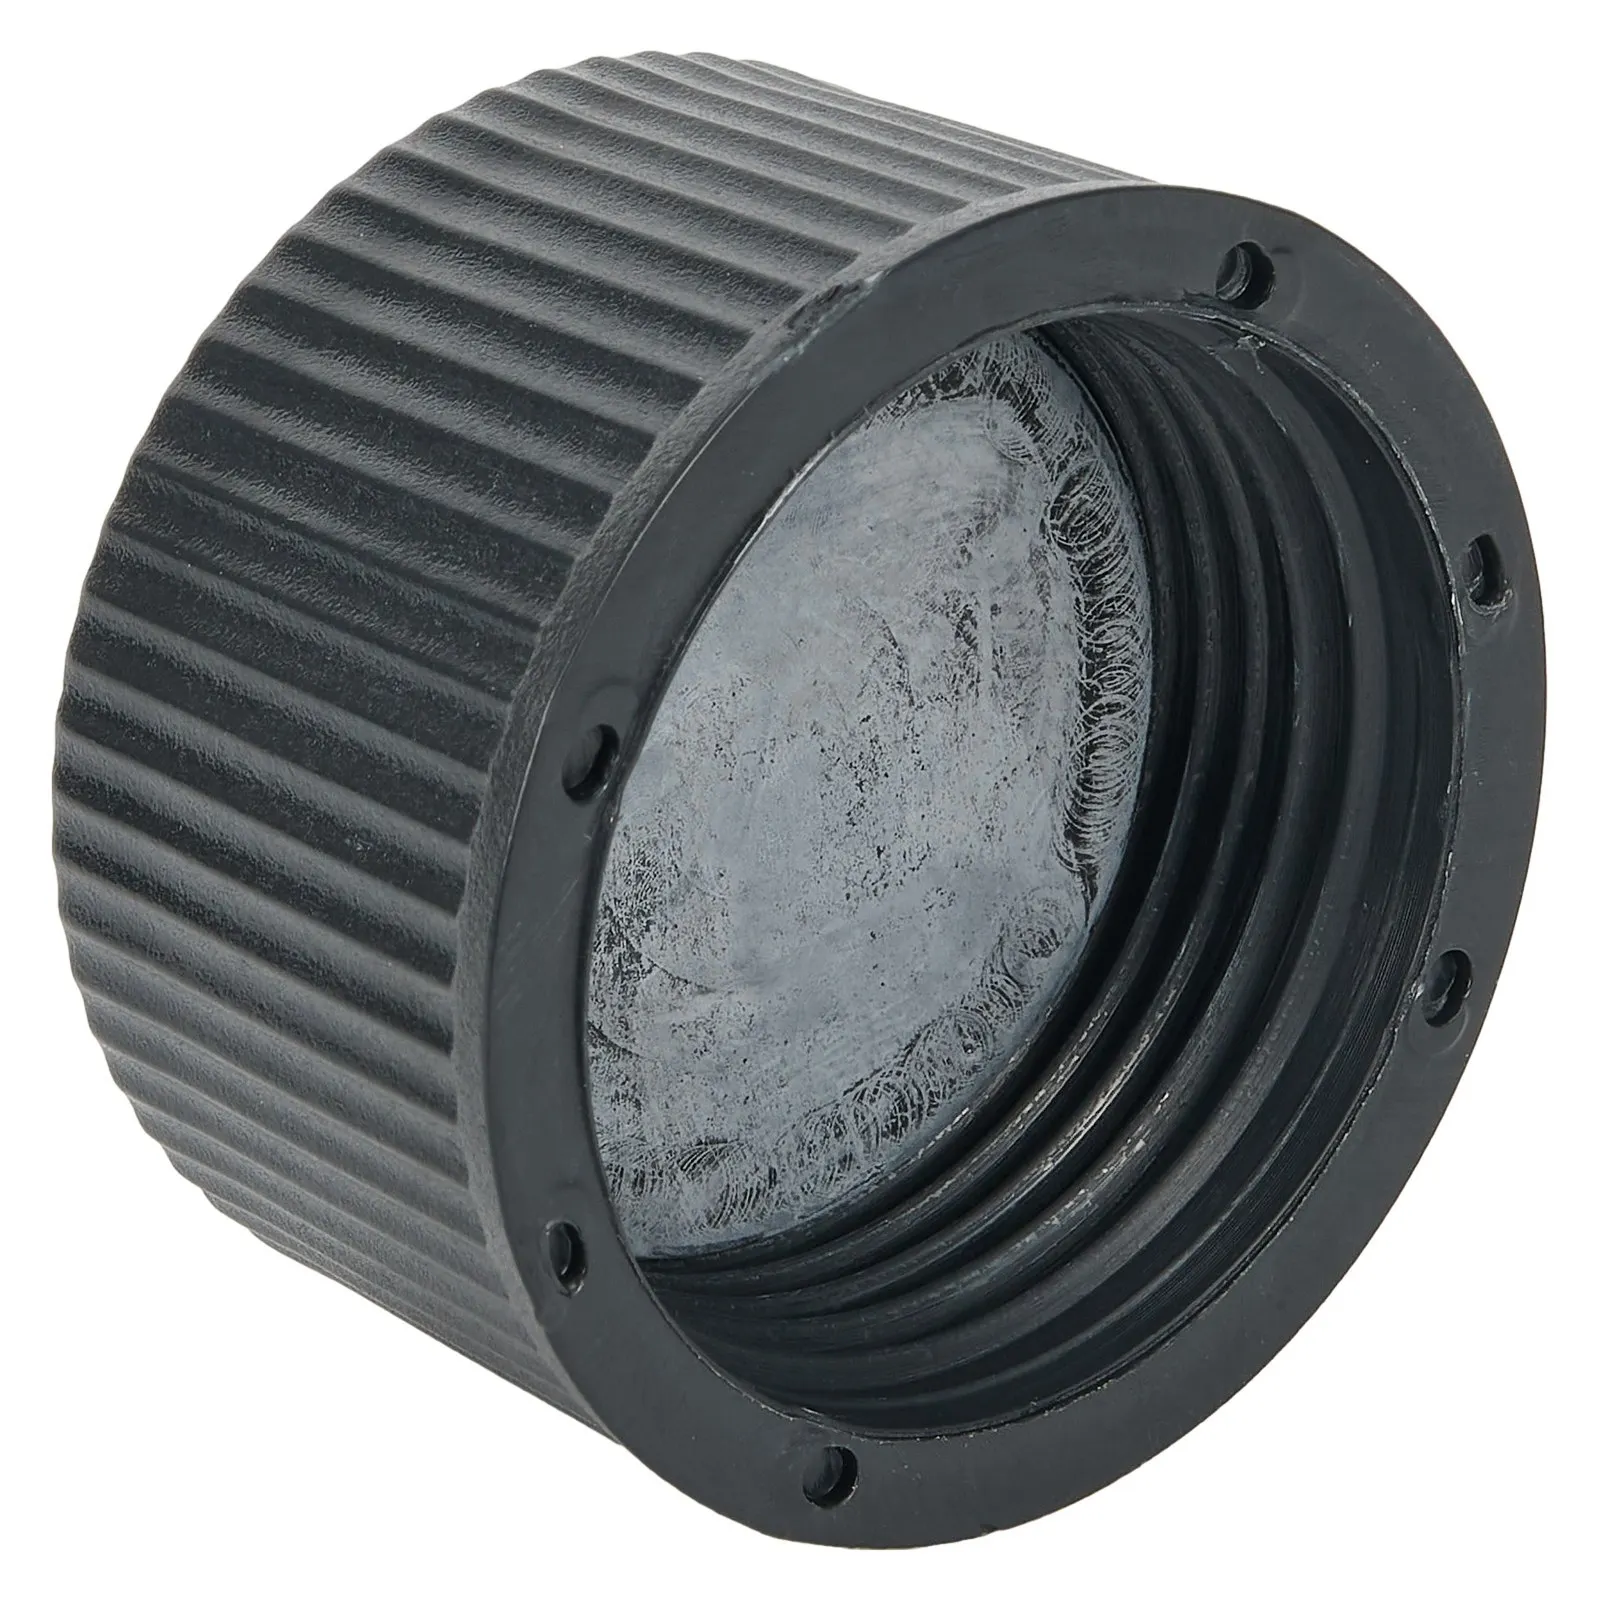 

Sand Filter Drain Cap And Gasket Replacement Heavy Duty Lightweight For SX180HG Outdoor Swimming Pool Spas Hot Tub